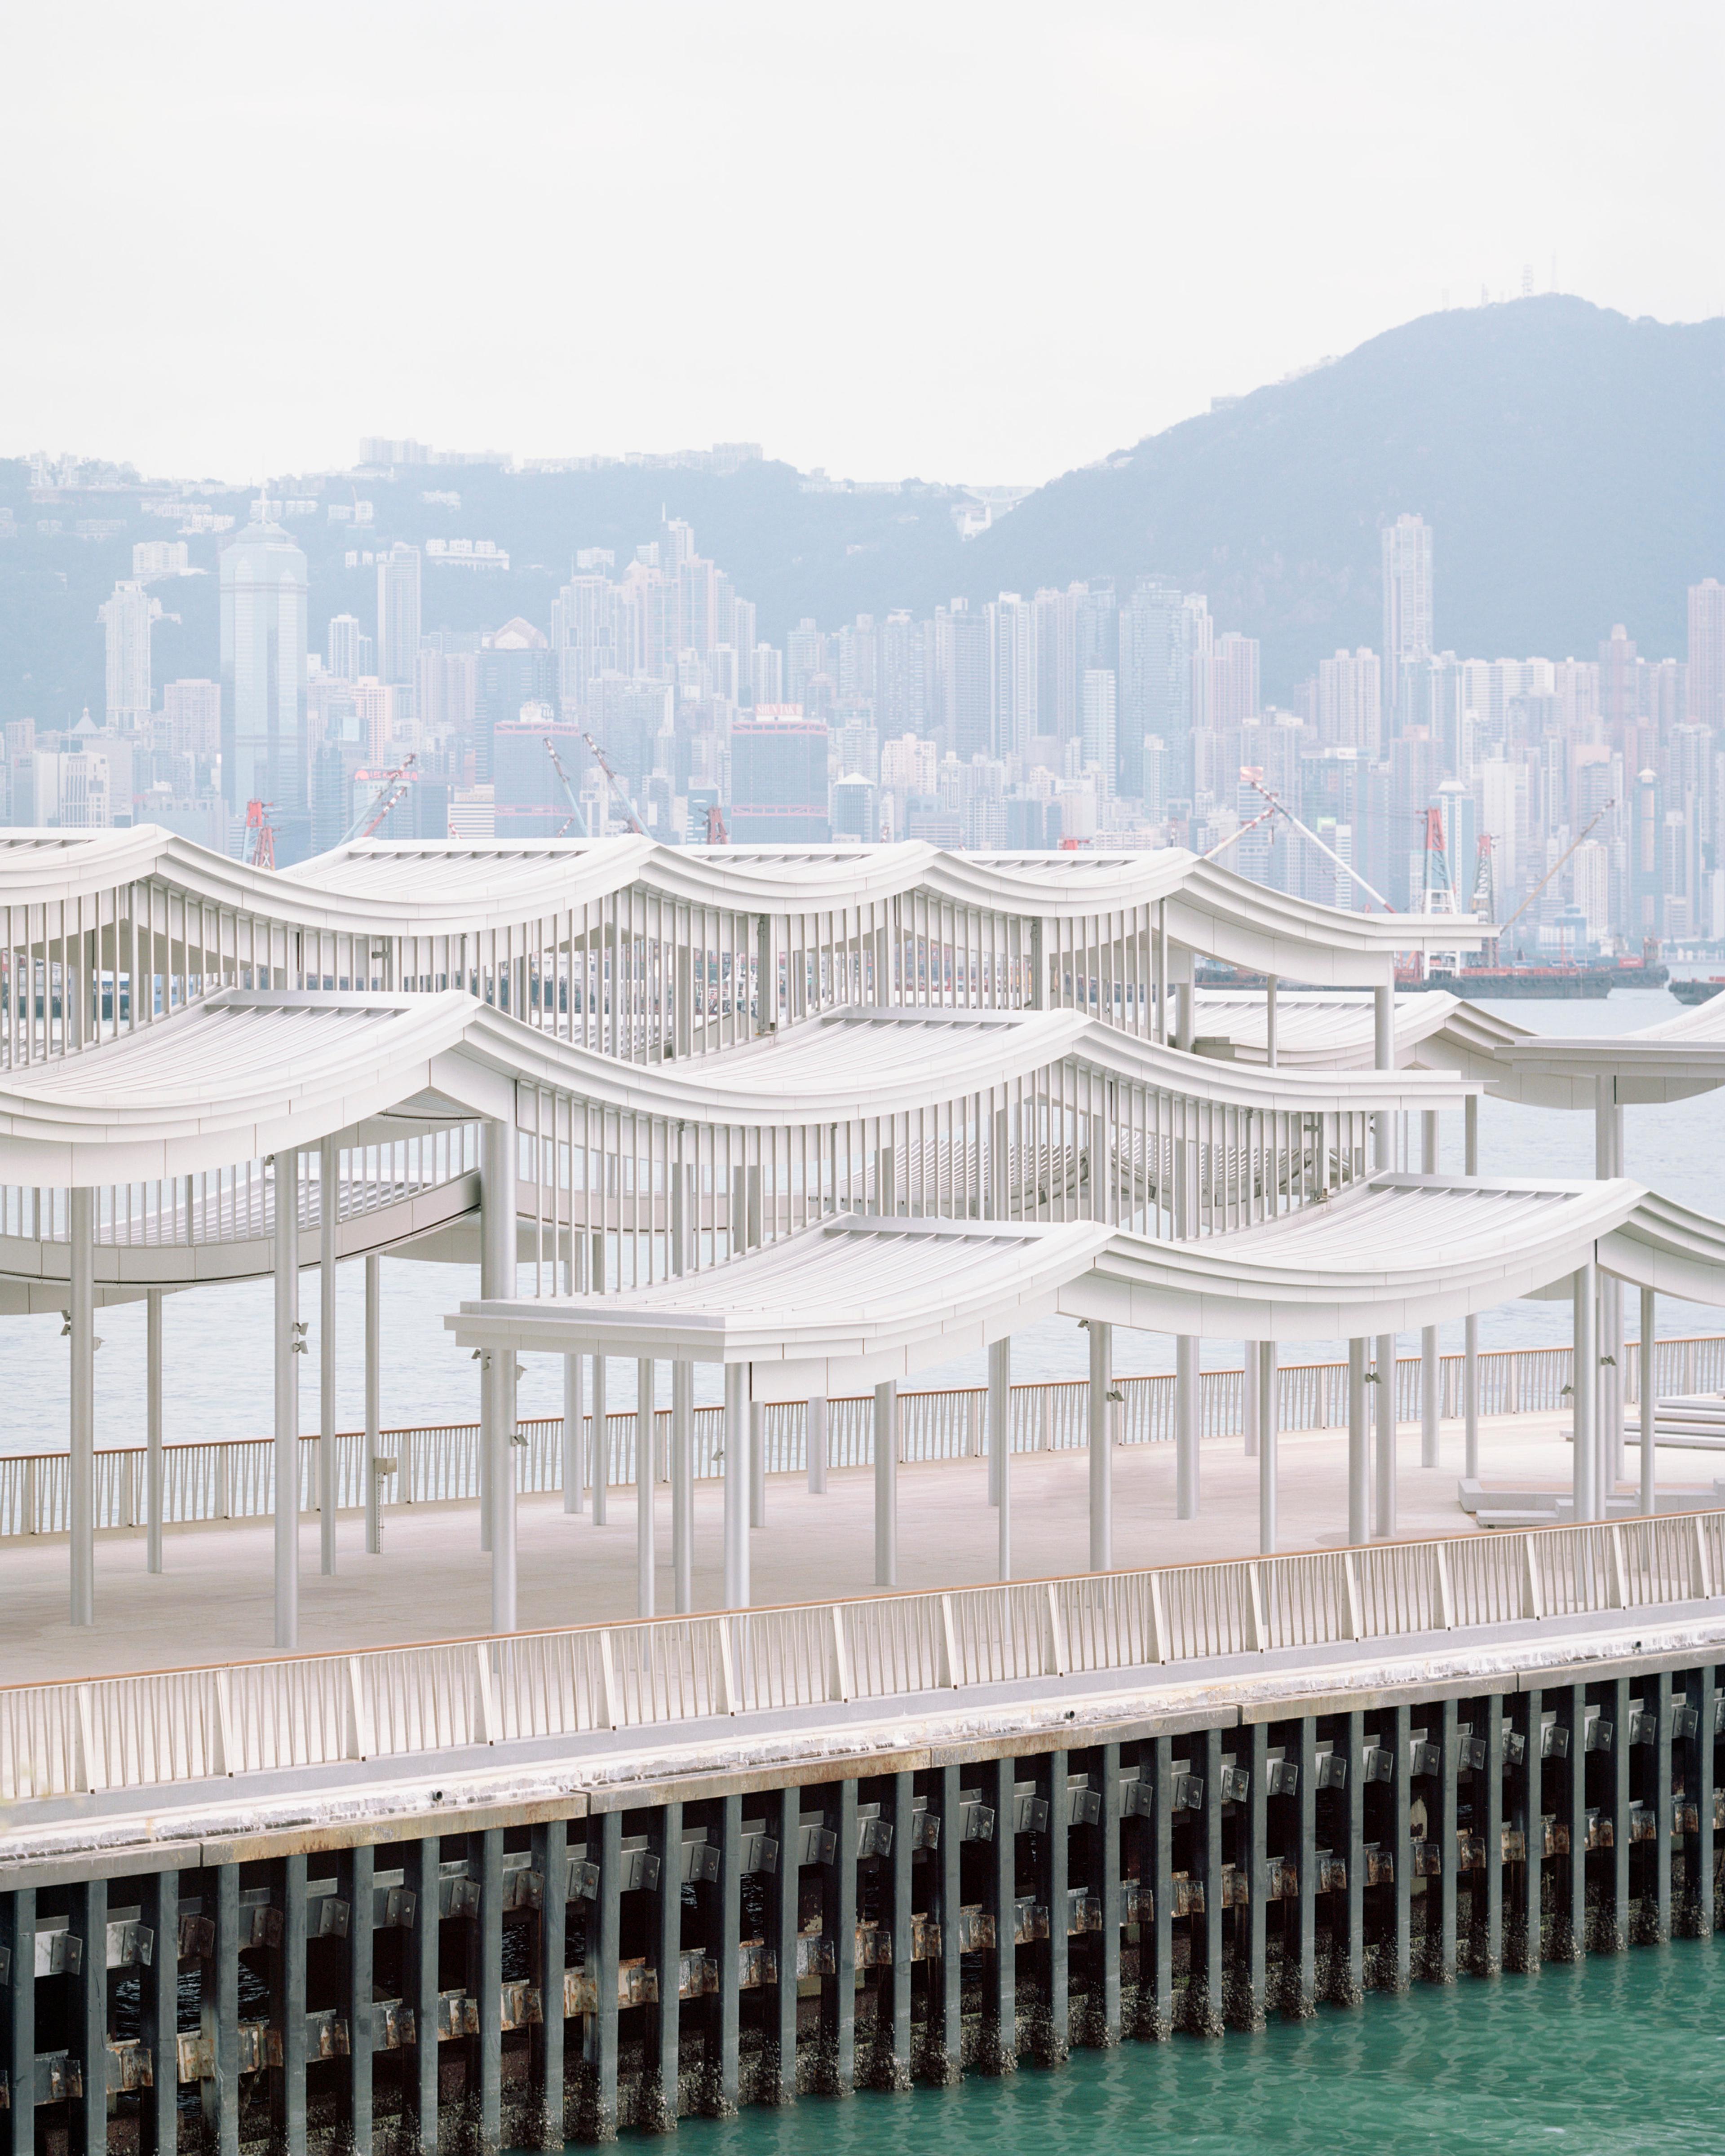 Elevation view of pier canopy with Hong Kong skyline in the background